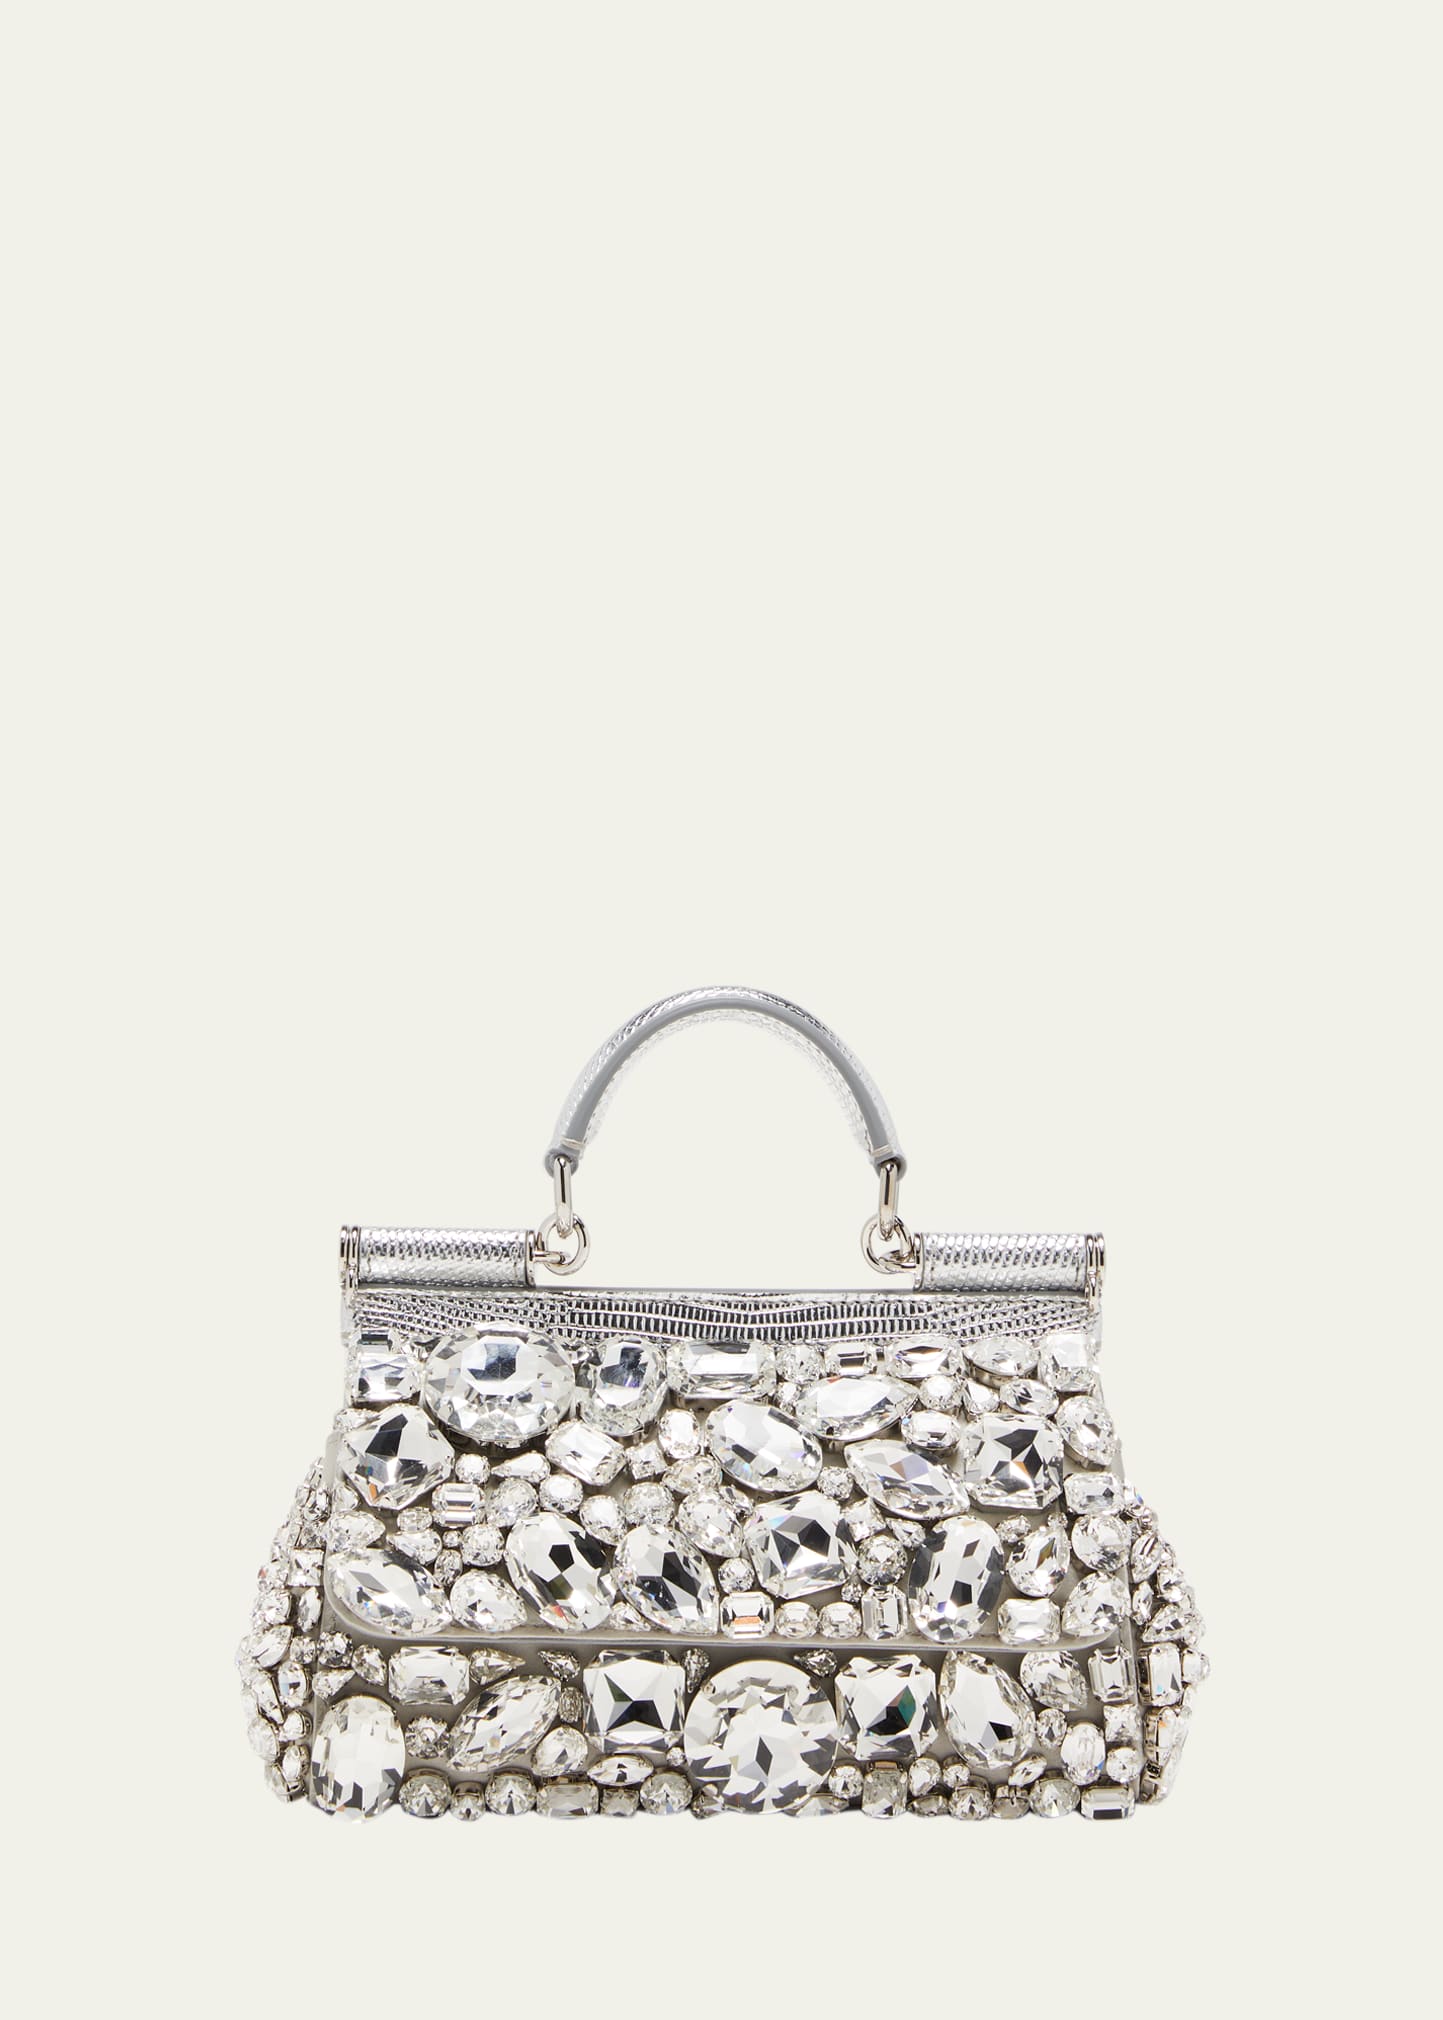 Small Sicily Bag with All Over Gemstone Embellishment